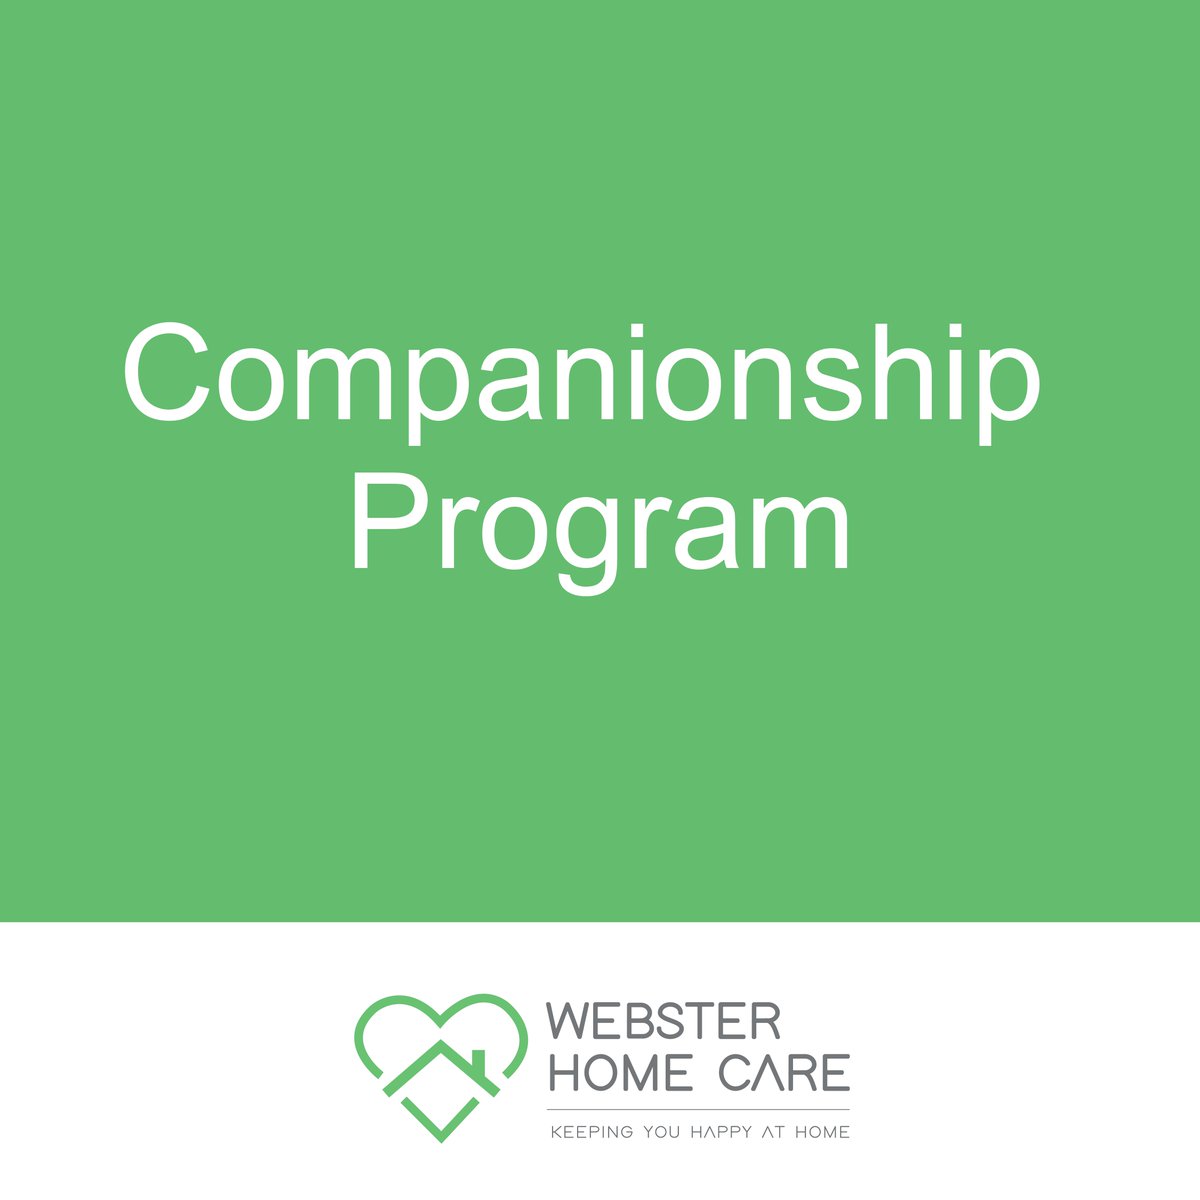 Companionship that Matters. 💙🤝 At Webster Home Care, we value the power of human connection! Our trained staff offers social support, ADL assistance, and heartfelt companionship to combat loneliness and enhance well-being. #WebsterHomeCare #CompanionshipMatters